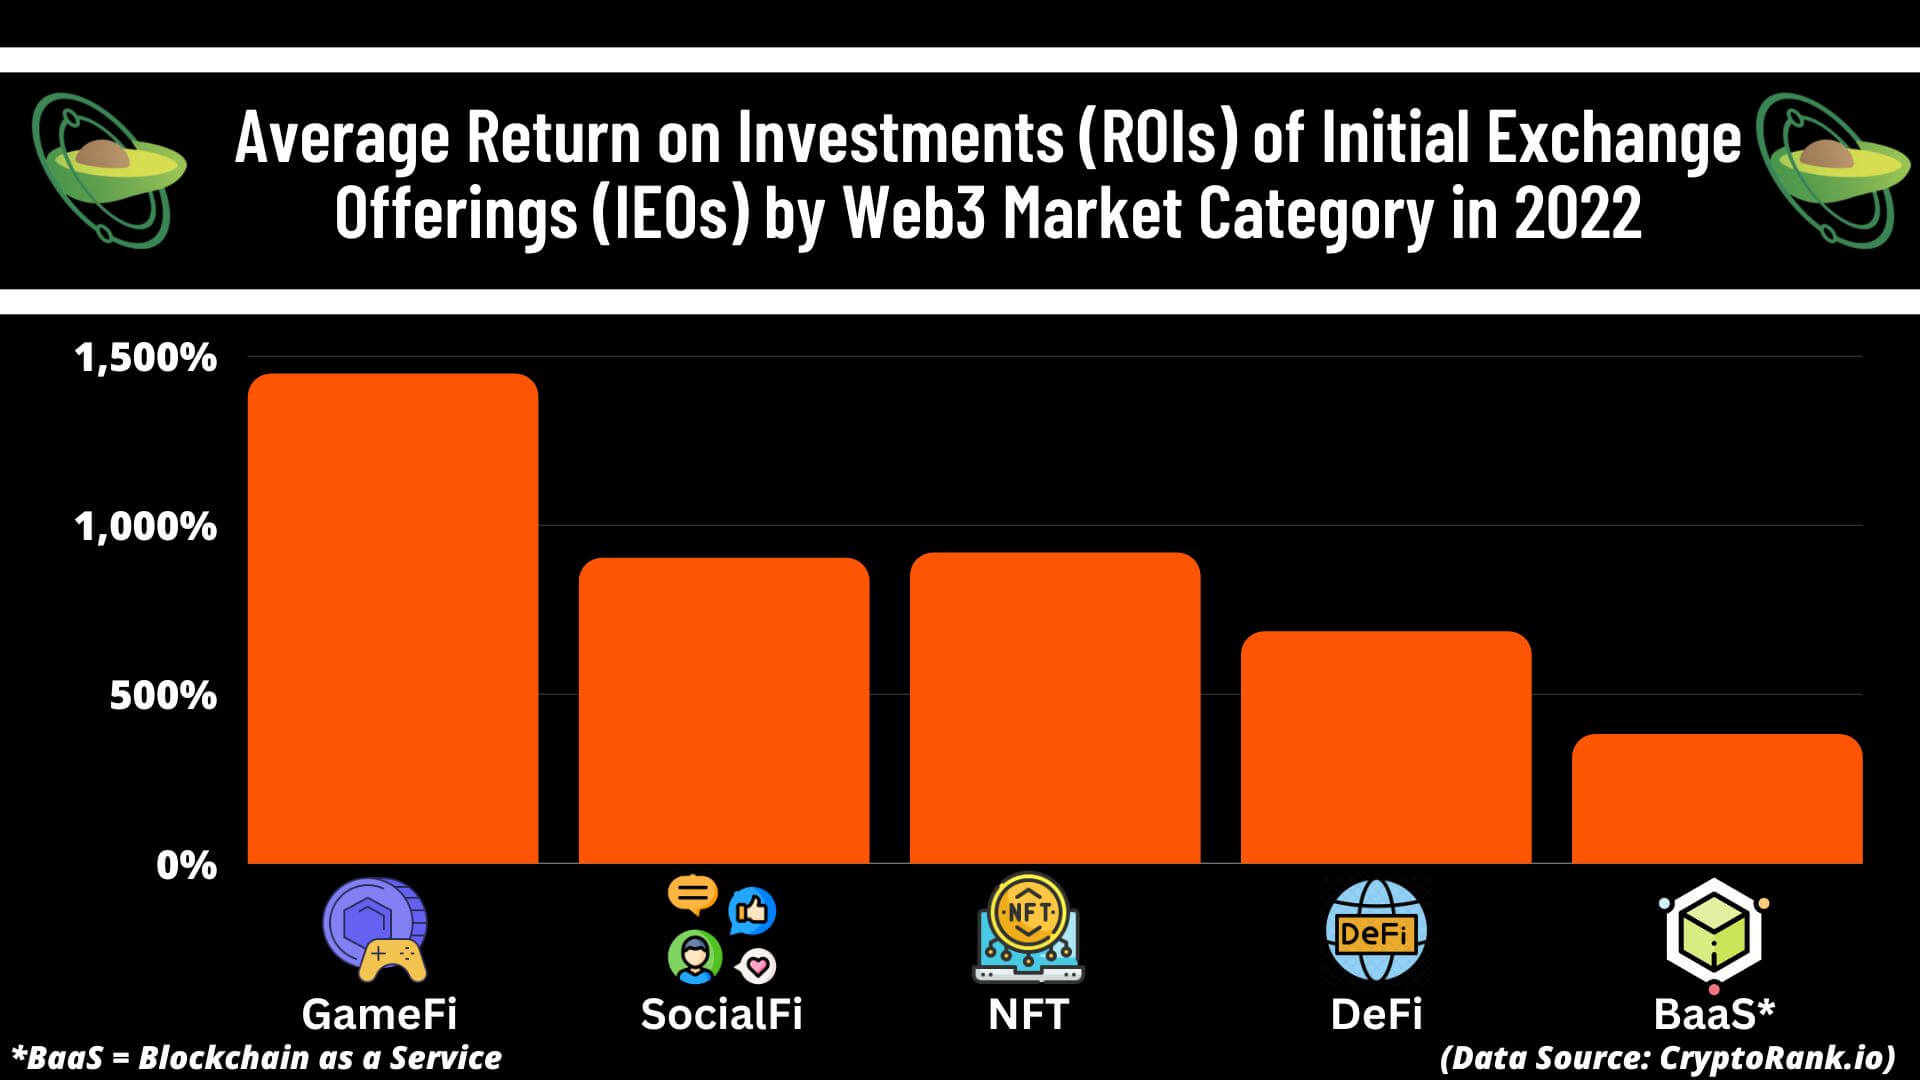 Average Return on Investments (ROIs) of Initial Exchange Offerings (IEOs) by Web3 Market Category in 2022 (3).jpg